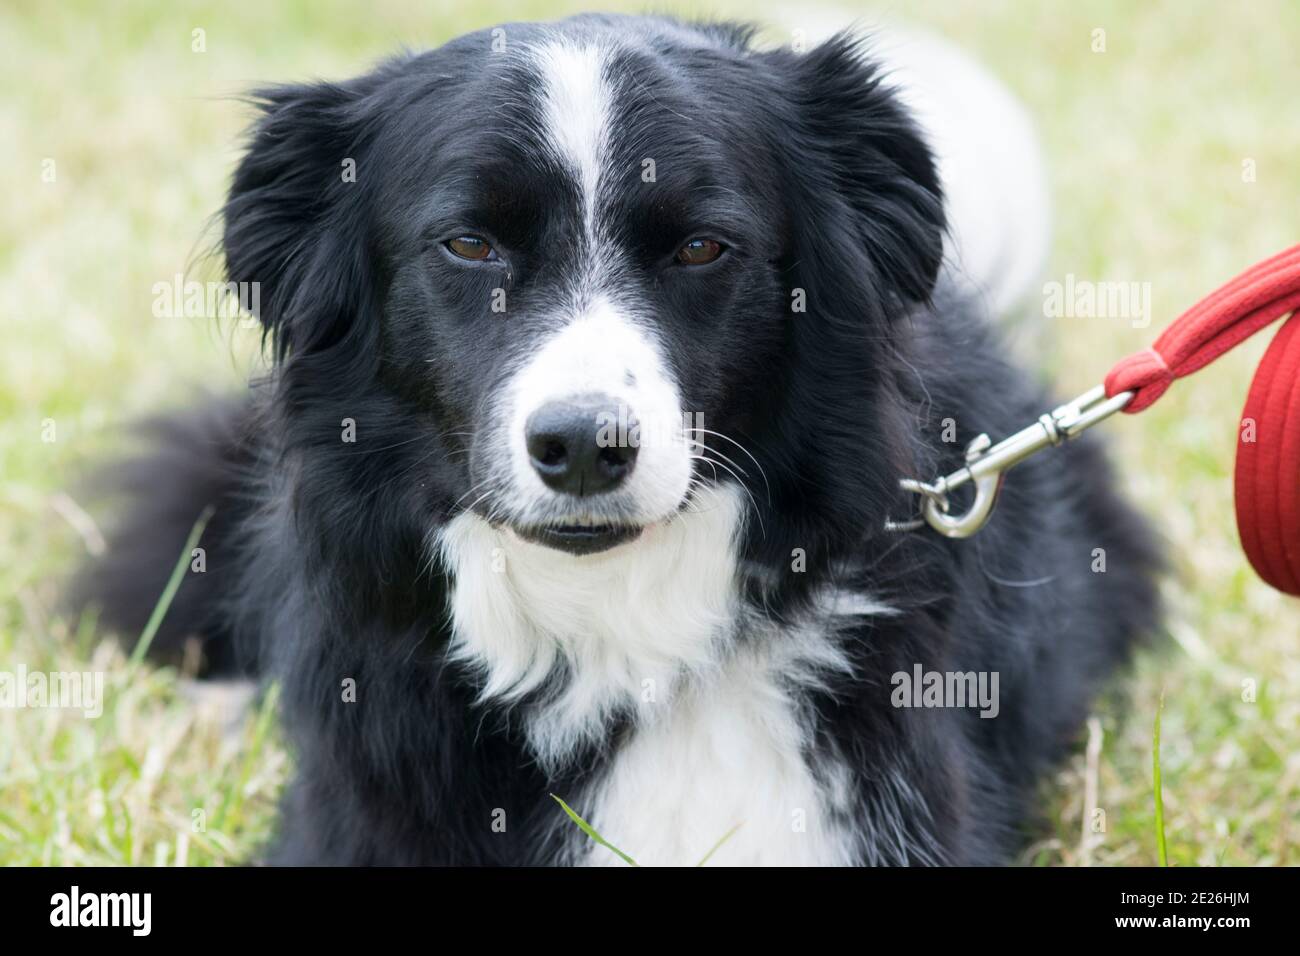 Loyal Friend High Resolution Stock Photography and Images - Alamy